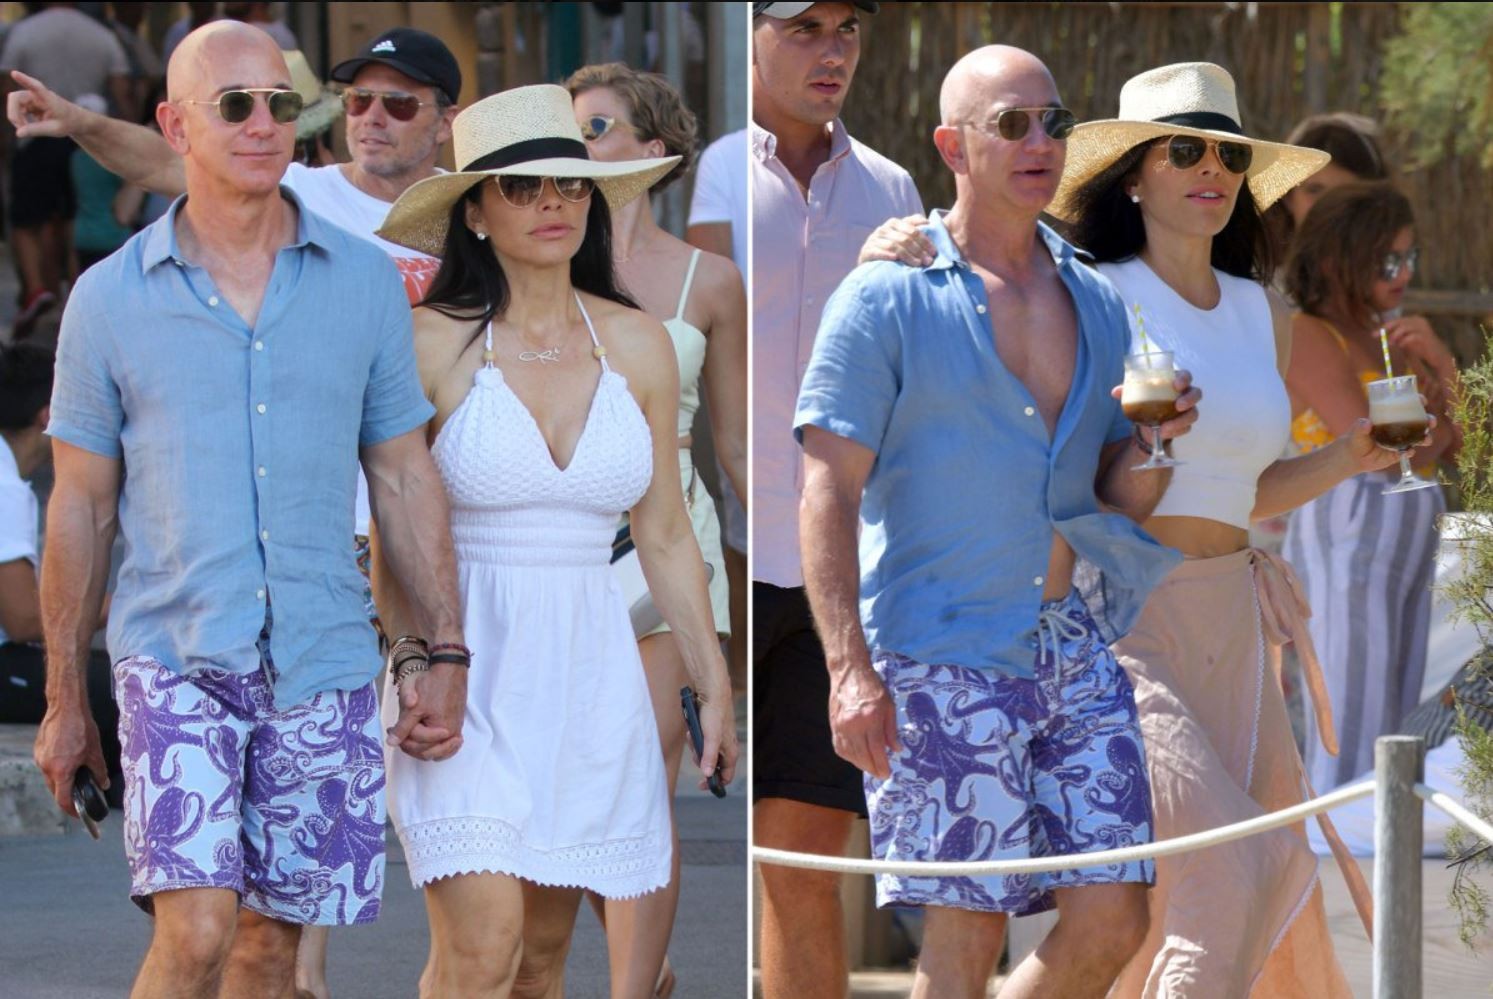 Jeff Bezos and his girlfriend, Lauren Sanchez, and the swimming trunks that sparked a social media frenzy. Photo: Twitter